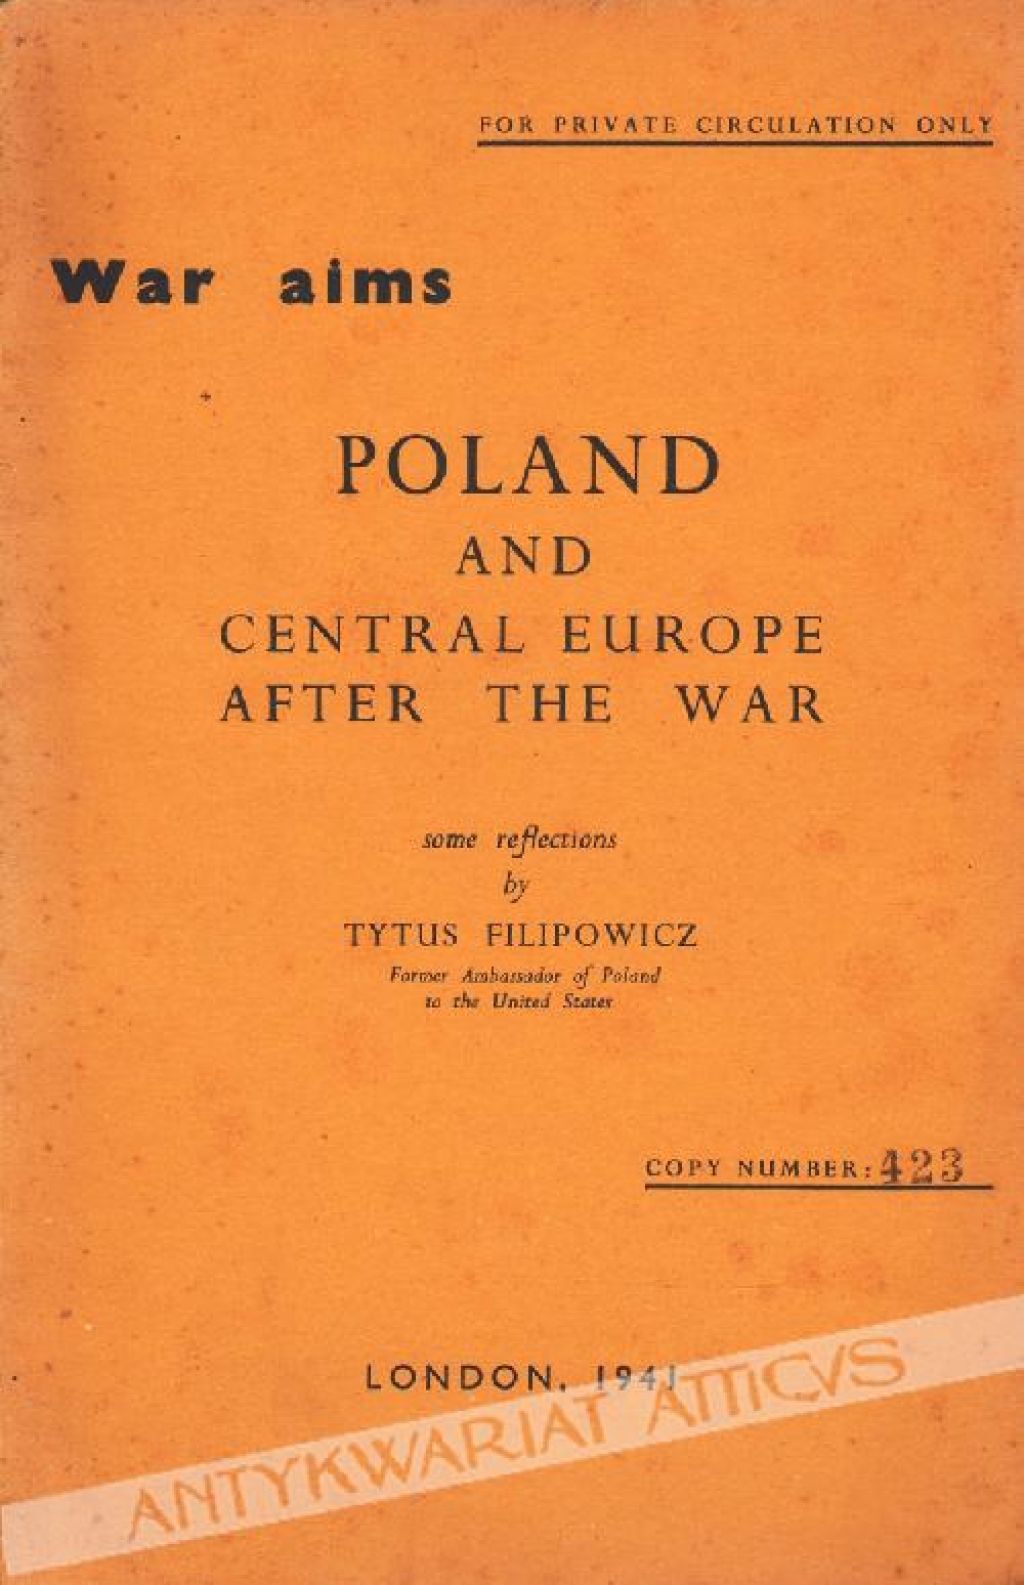 Poland and Central Europe after the war